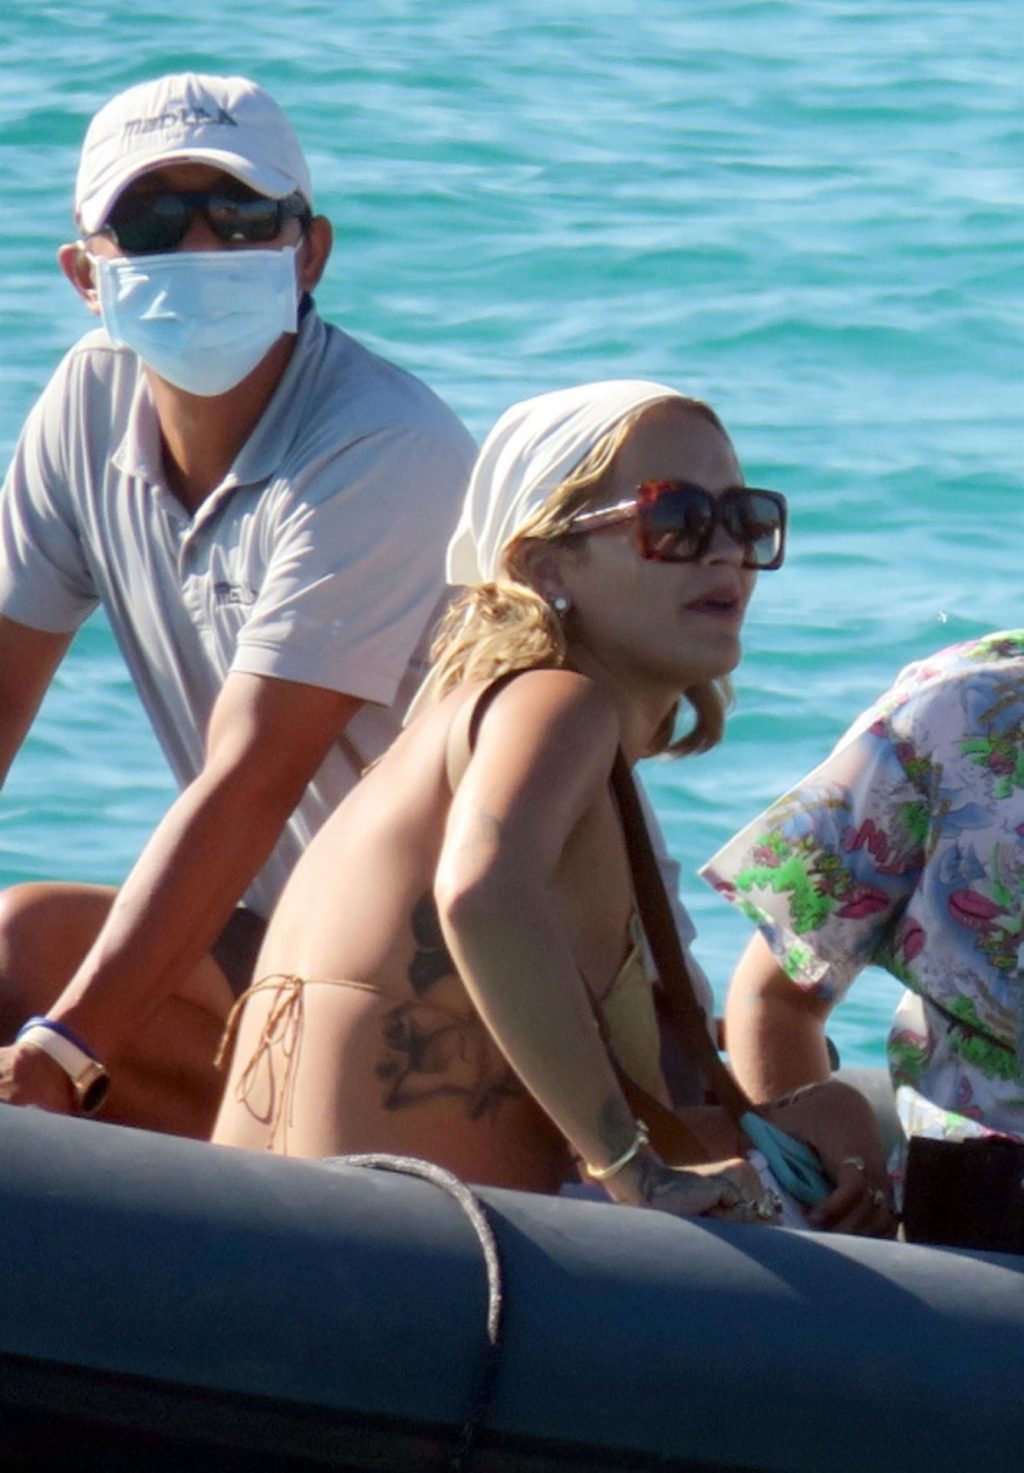 It’s Party Time Onboard Rita Ora’s Boat (80 Photos)